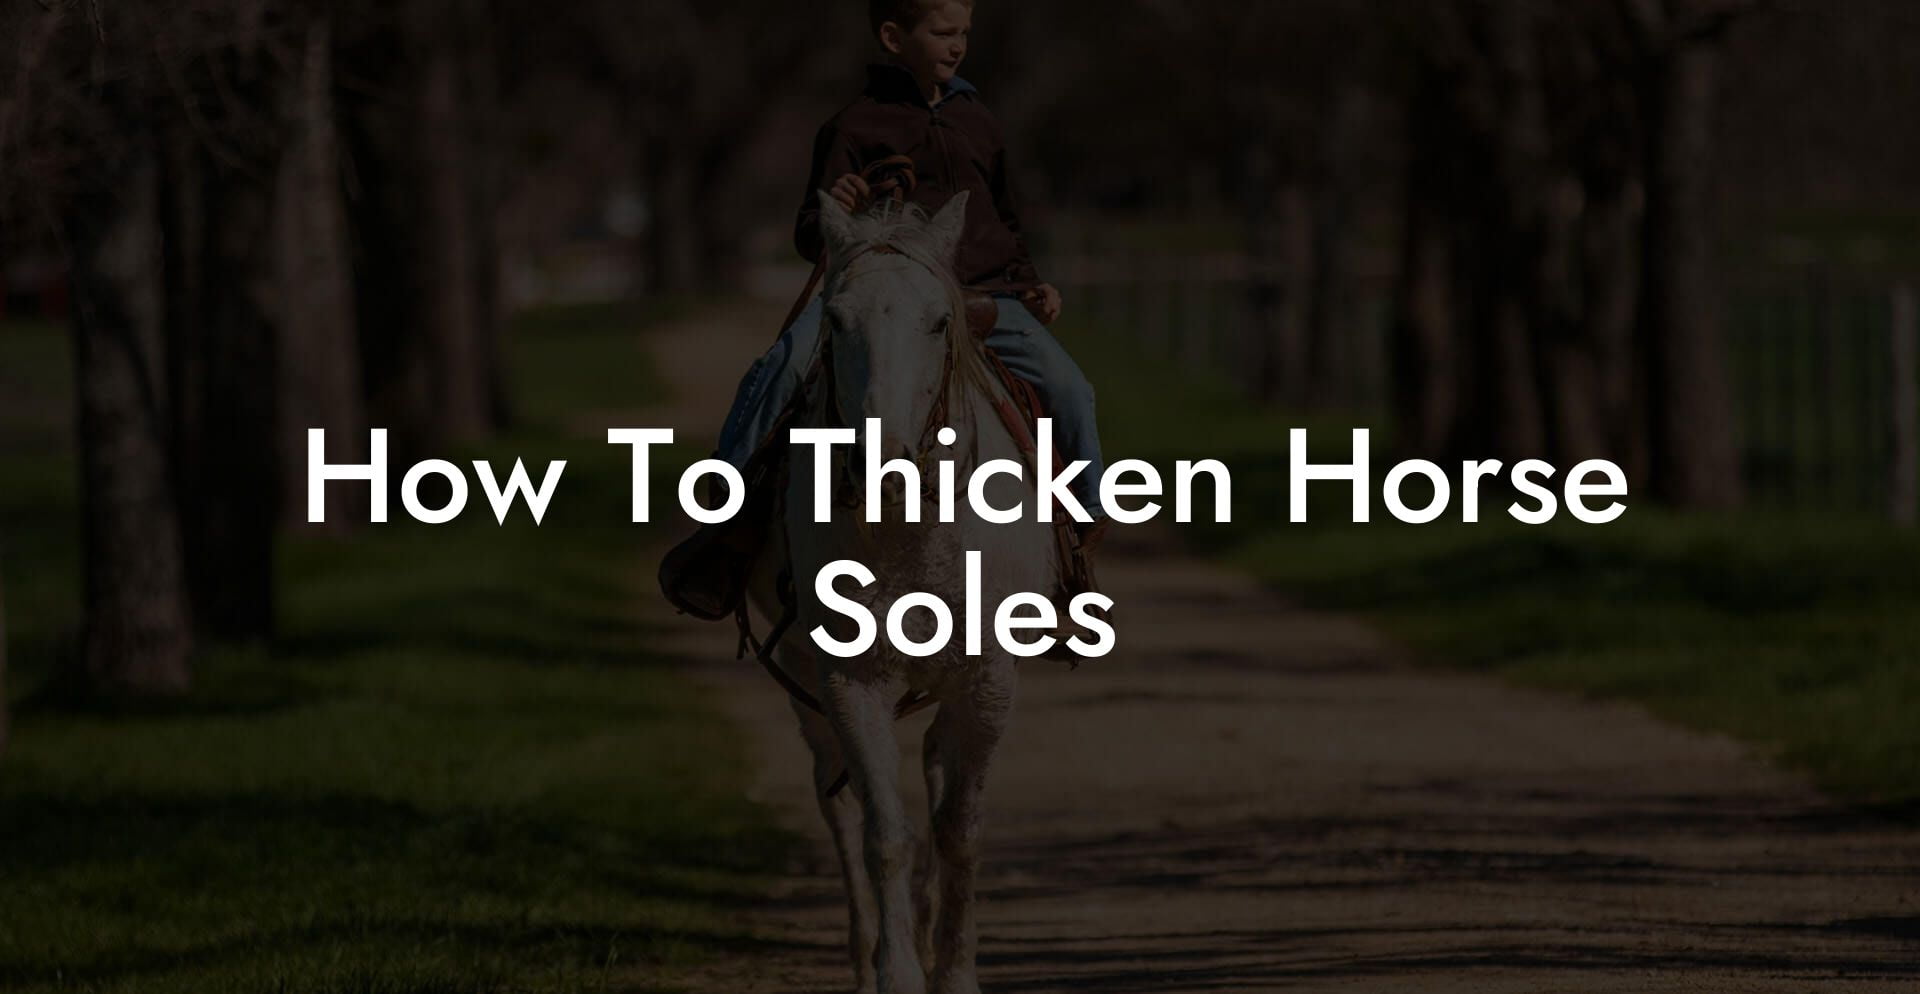 How To Thicken Horse Soles